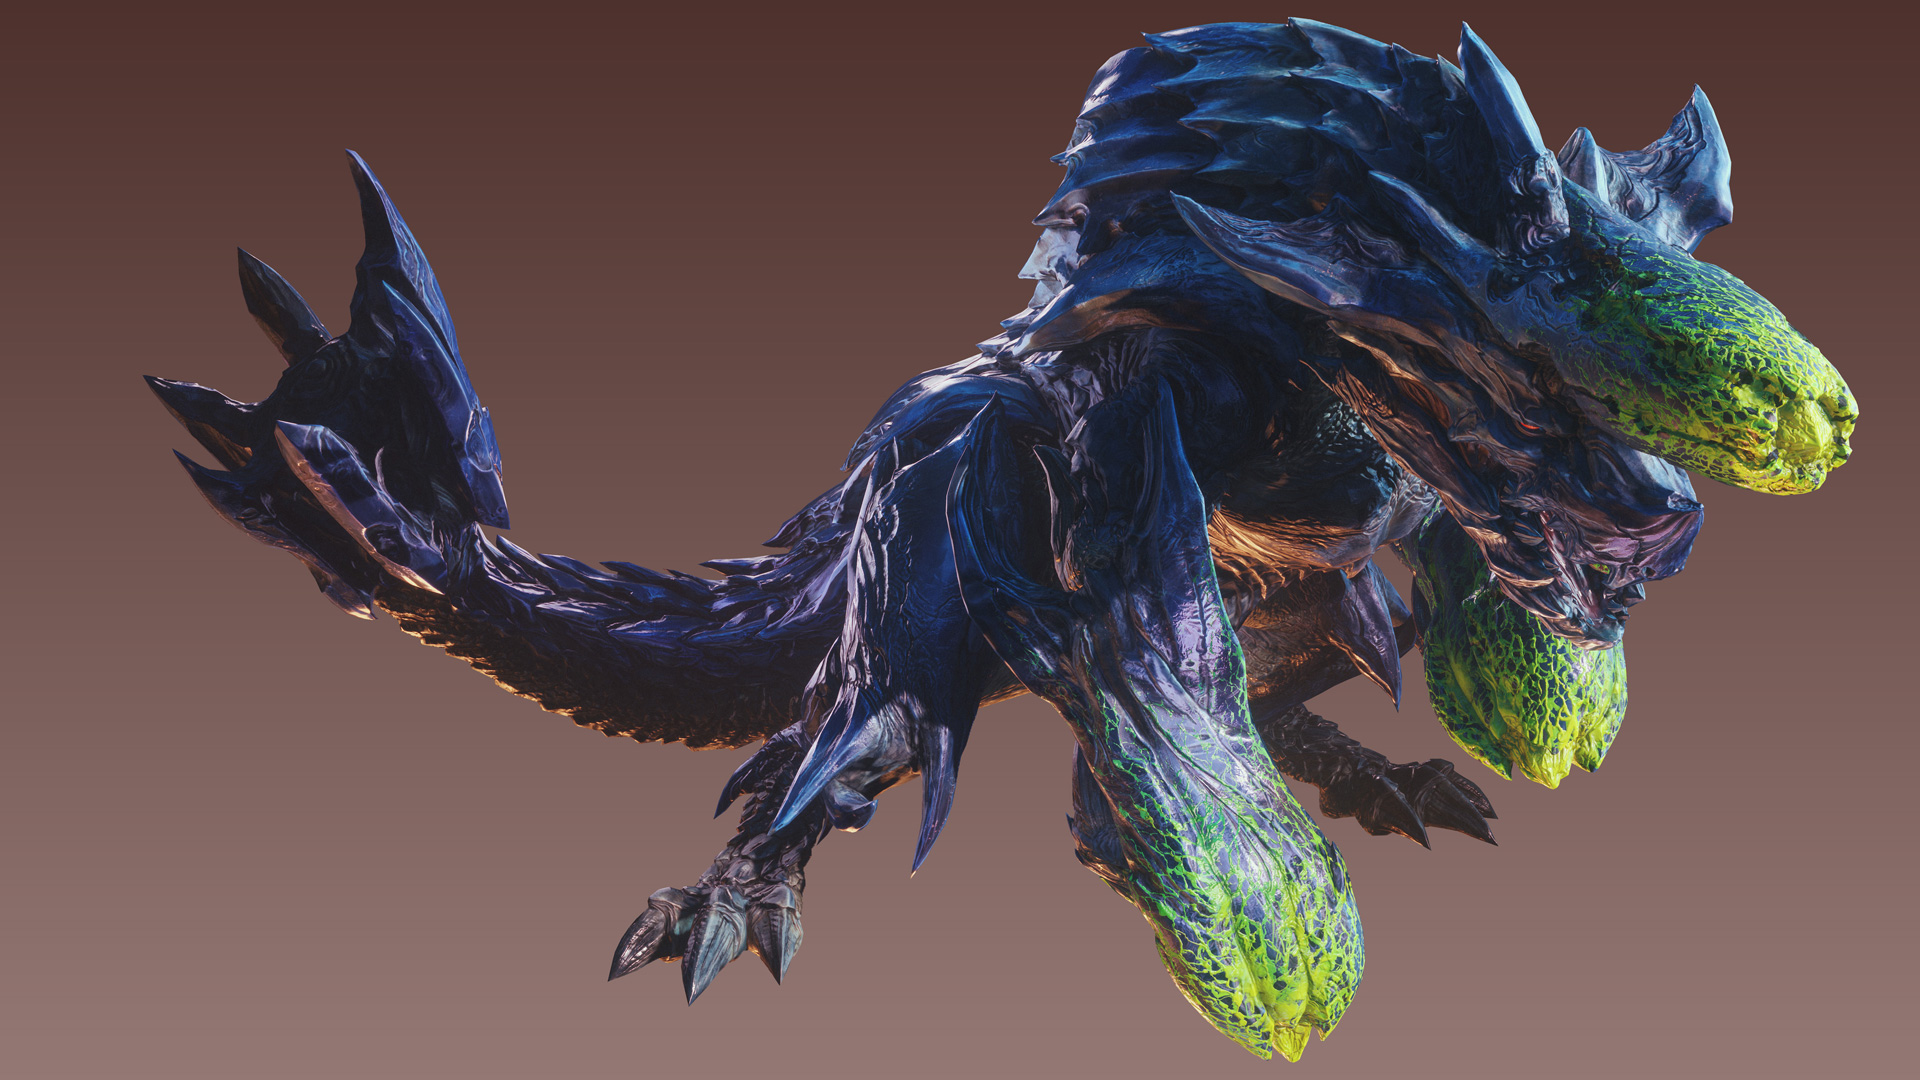 From A to Z, here's every monster revealed for Monster Hunter World: I...